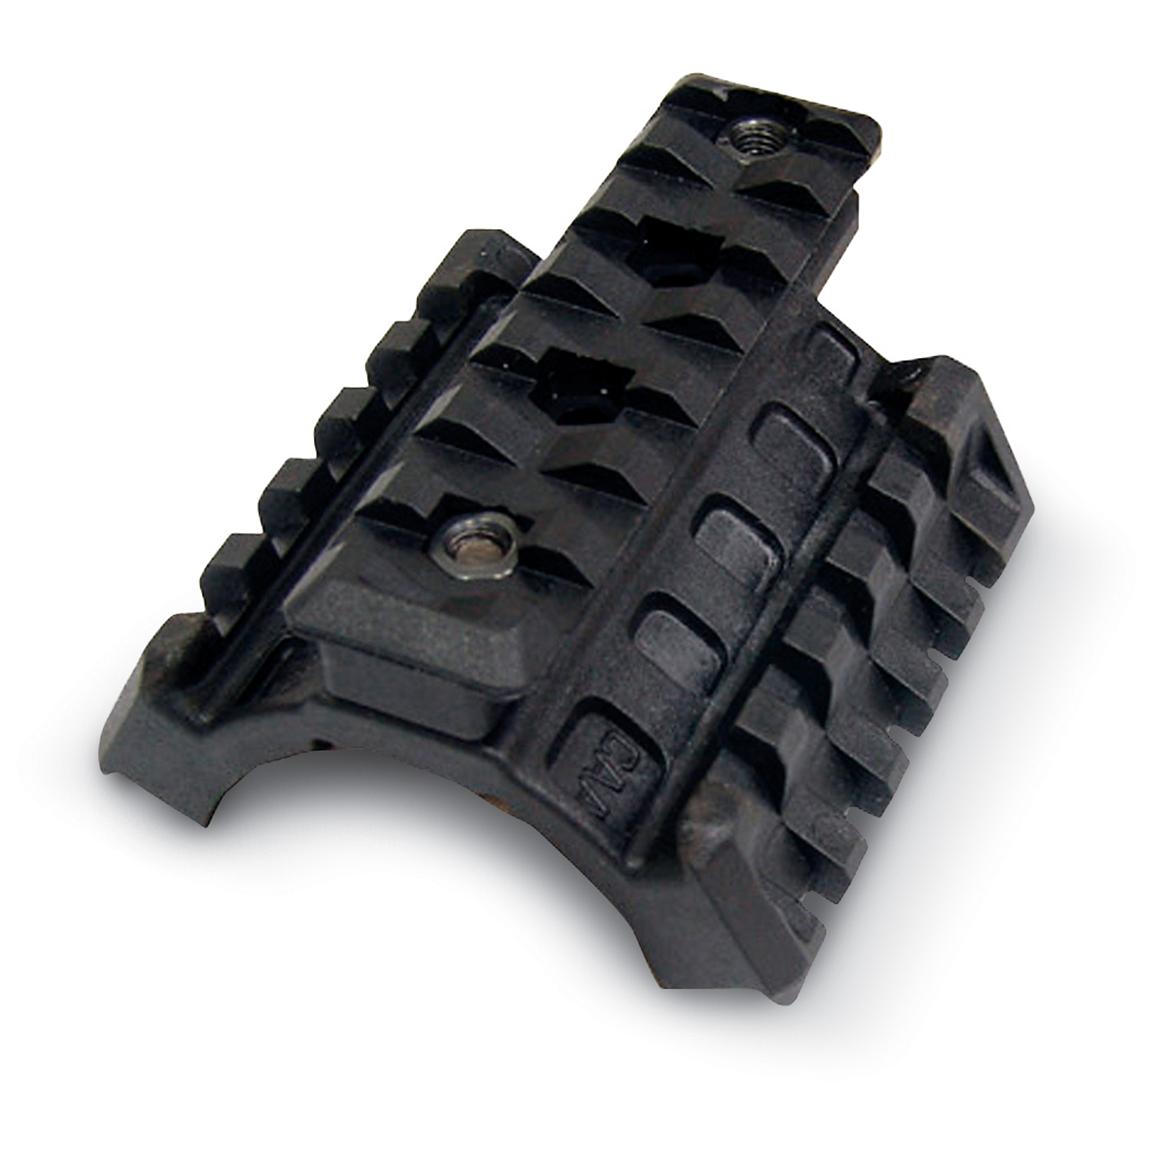 CAA Triple Rail Mount System - 121406, Tactical Rifle Accessories at ...